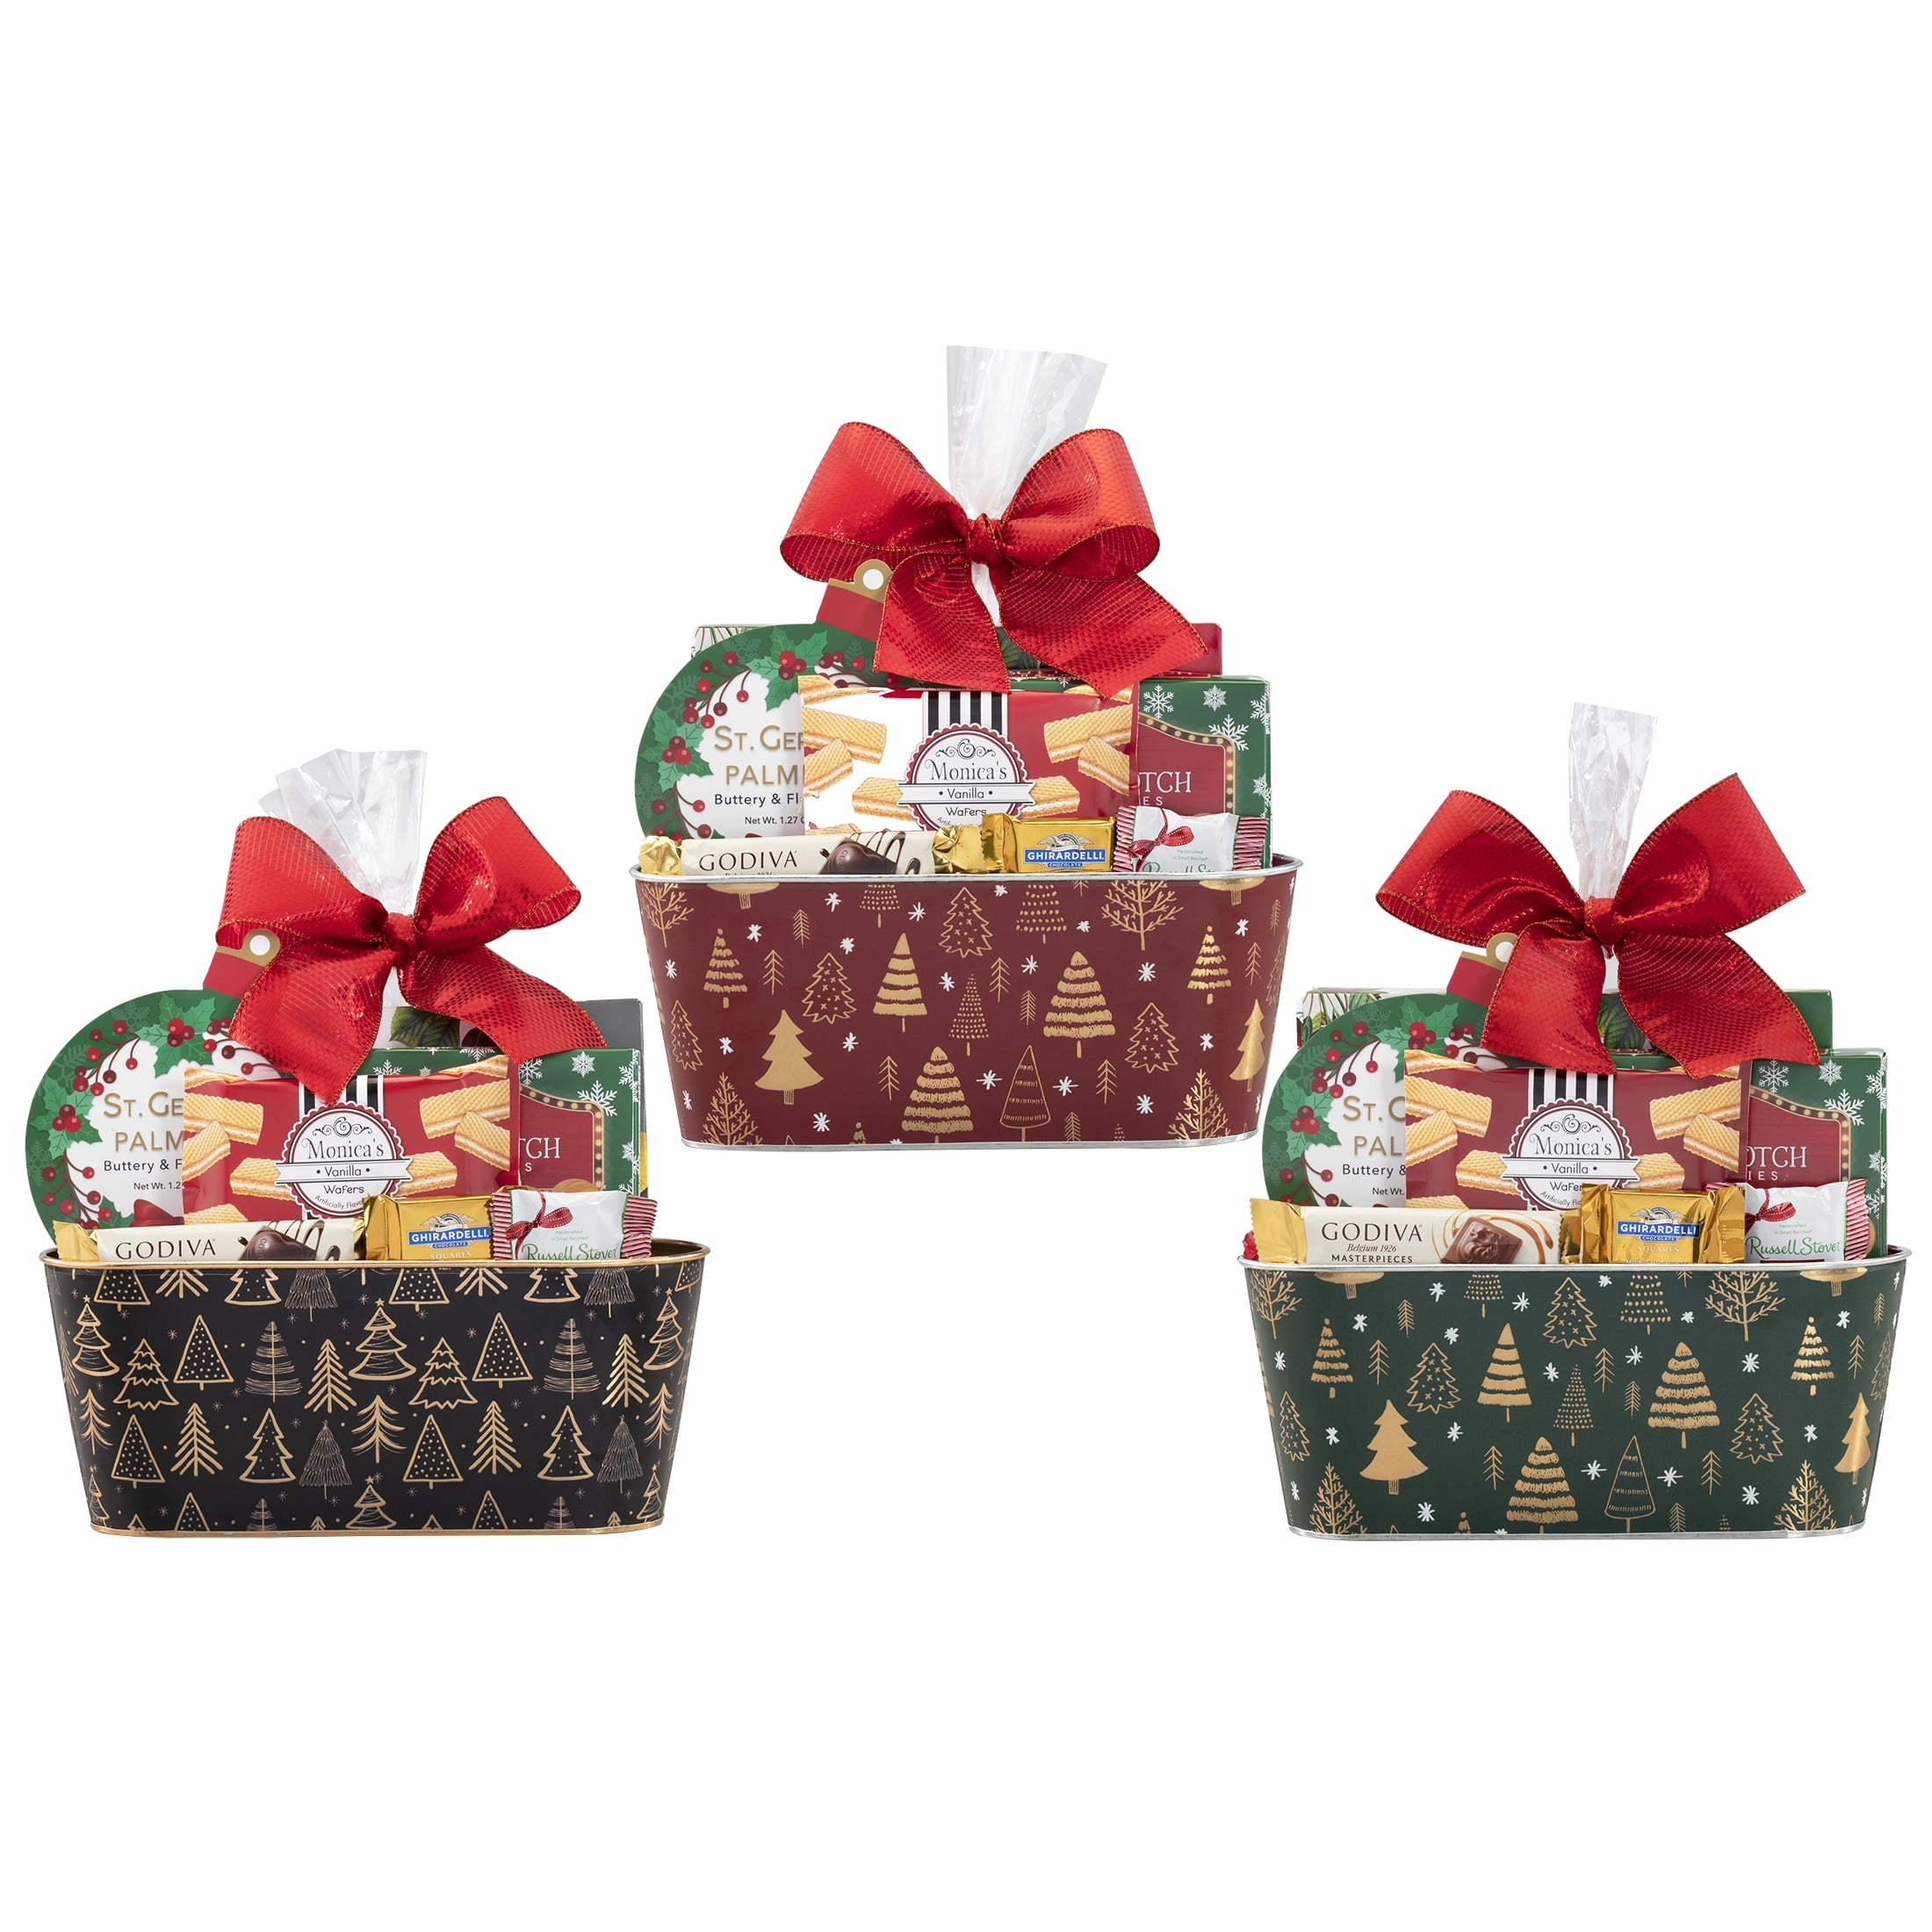 All About the Trees Holiday Gift Basket by Houdini